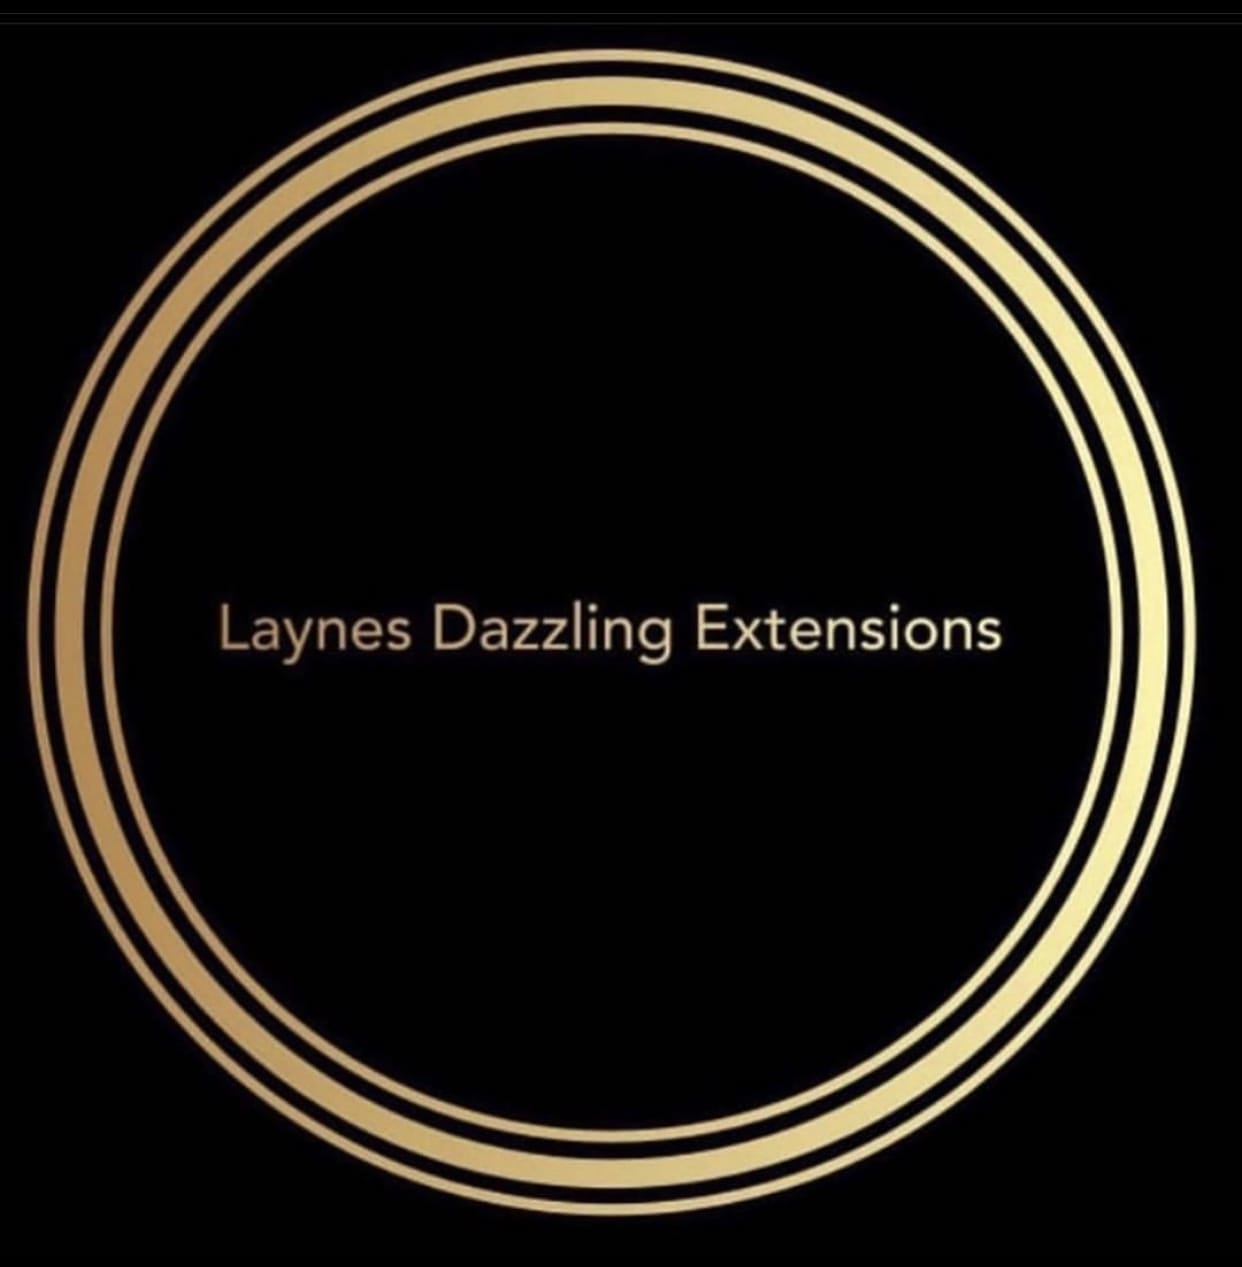 Layne’s Dazzling Extensions